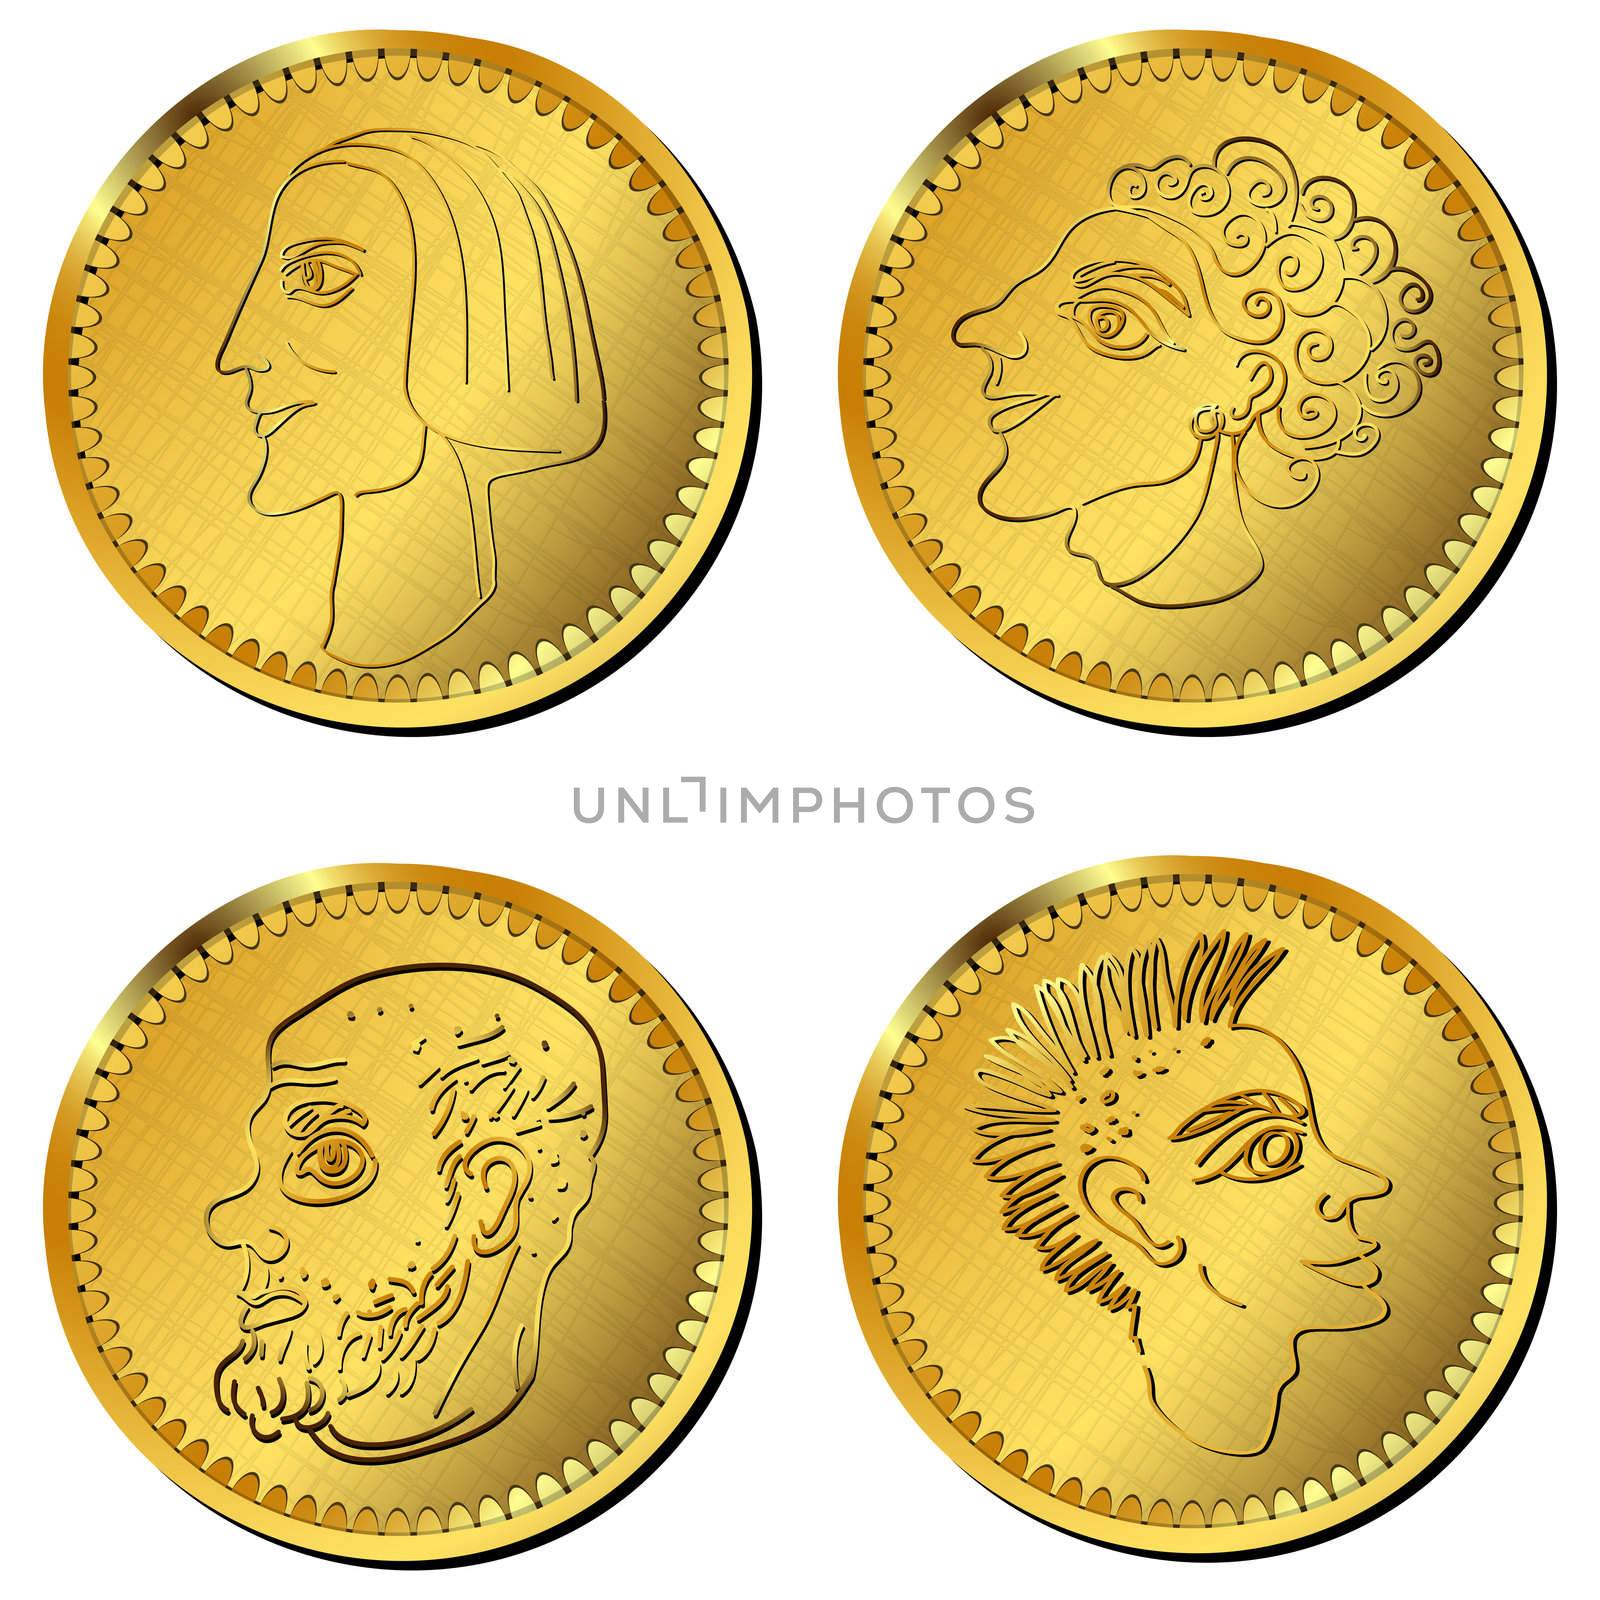 Old coins by catacos